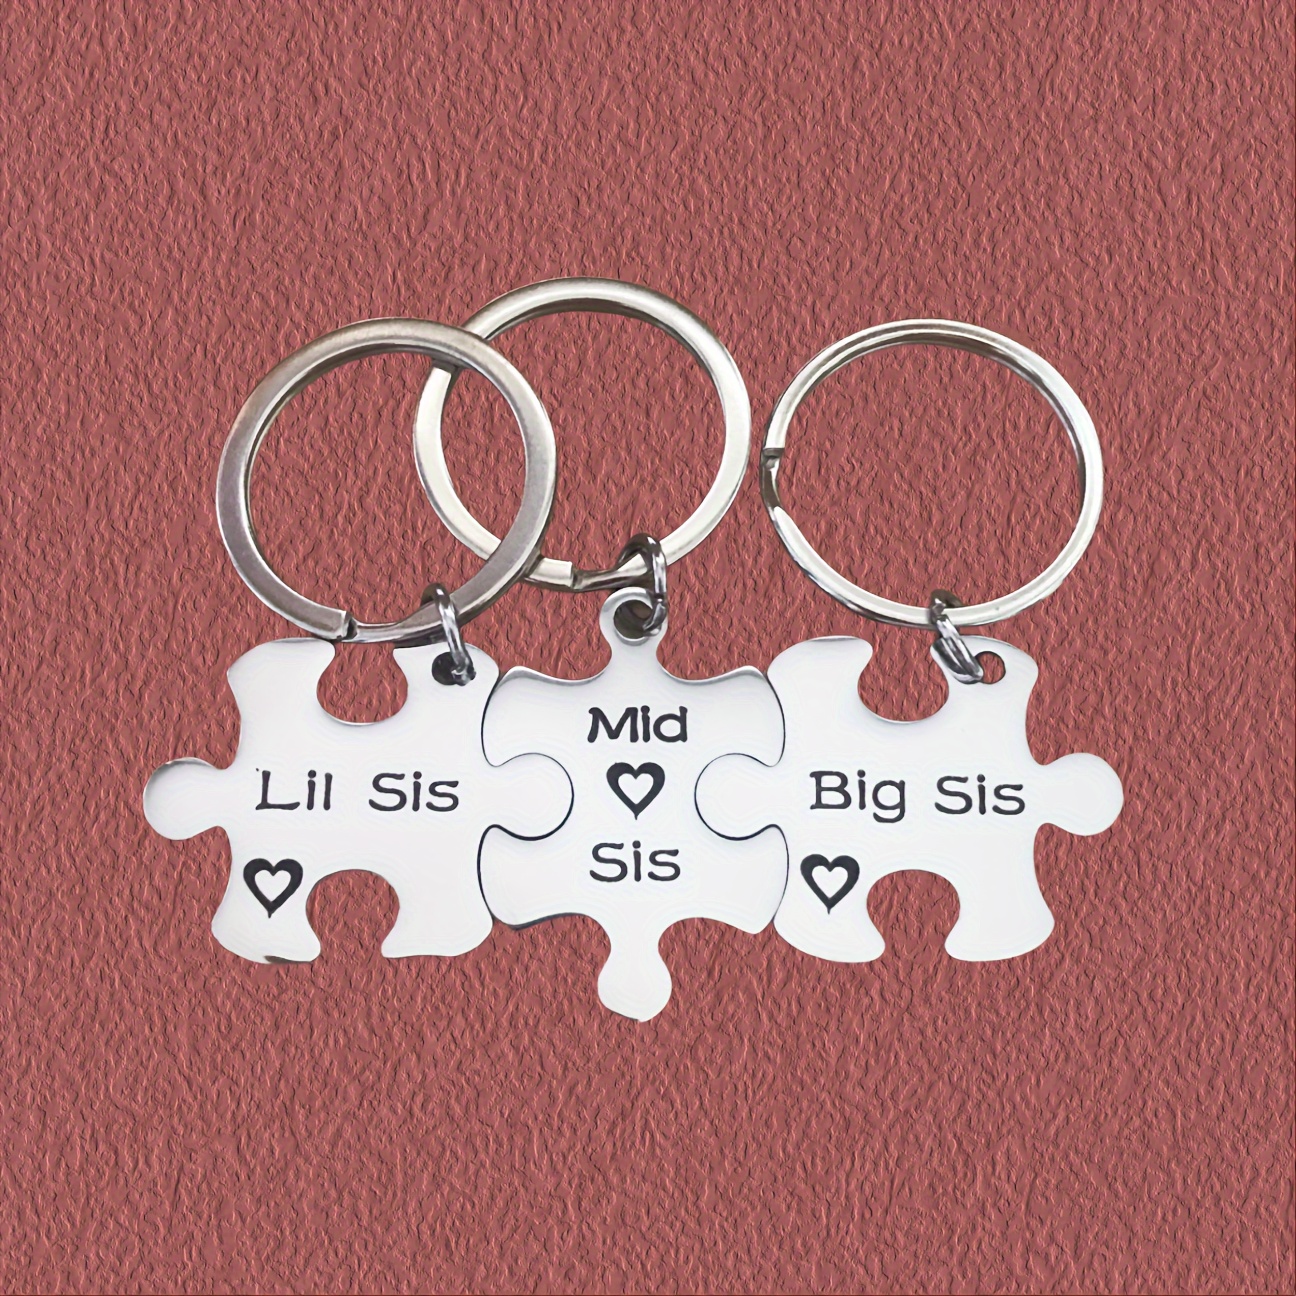 

3pcs/set Big Sis & Mid Sis & Lil Sis Keychain/necklace Stainless Steel Key Chain Ring Birthday Christmas Gift For Sisters Best Bff